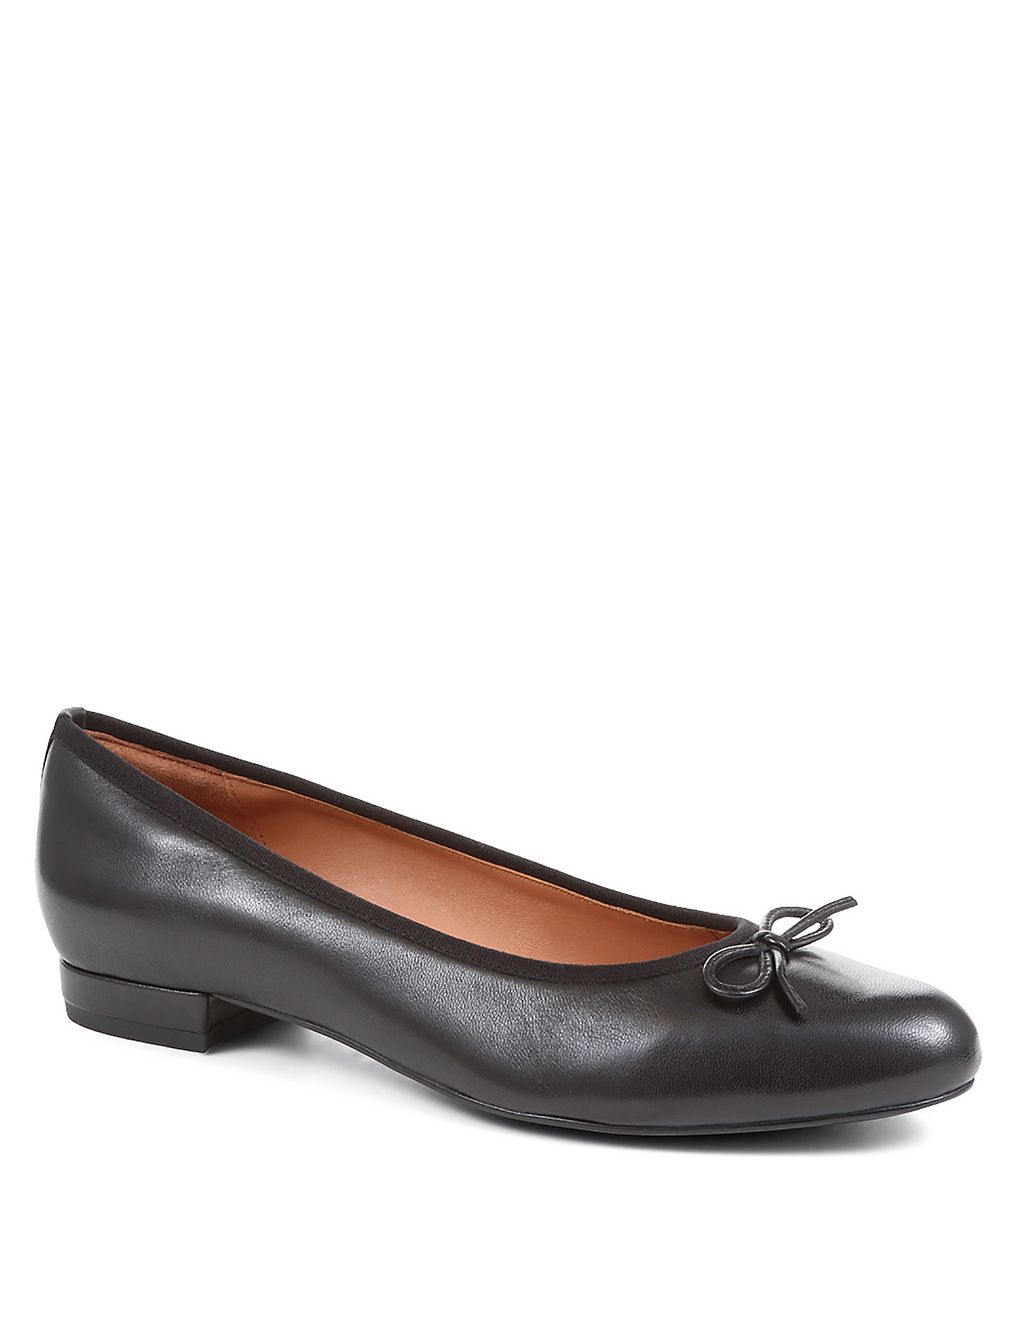 Leather Flat Ballet Pumps 1 of 7